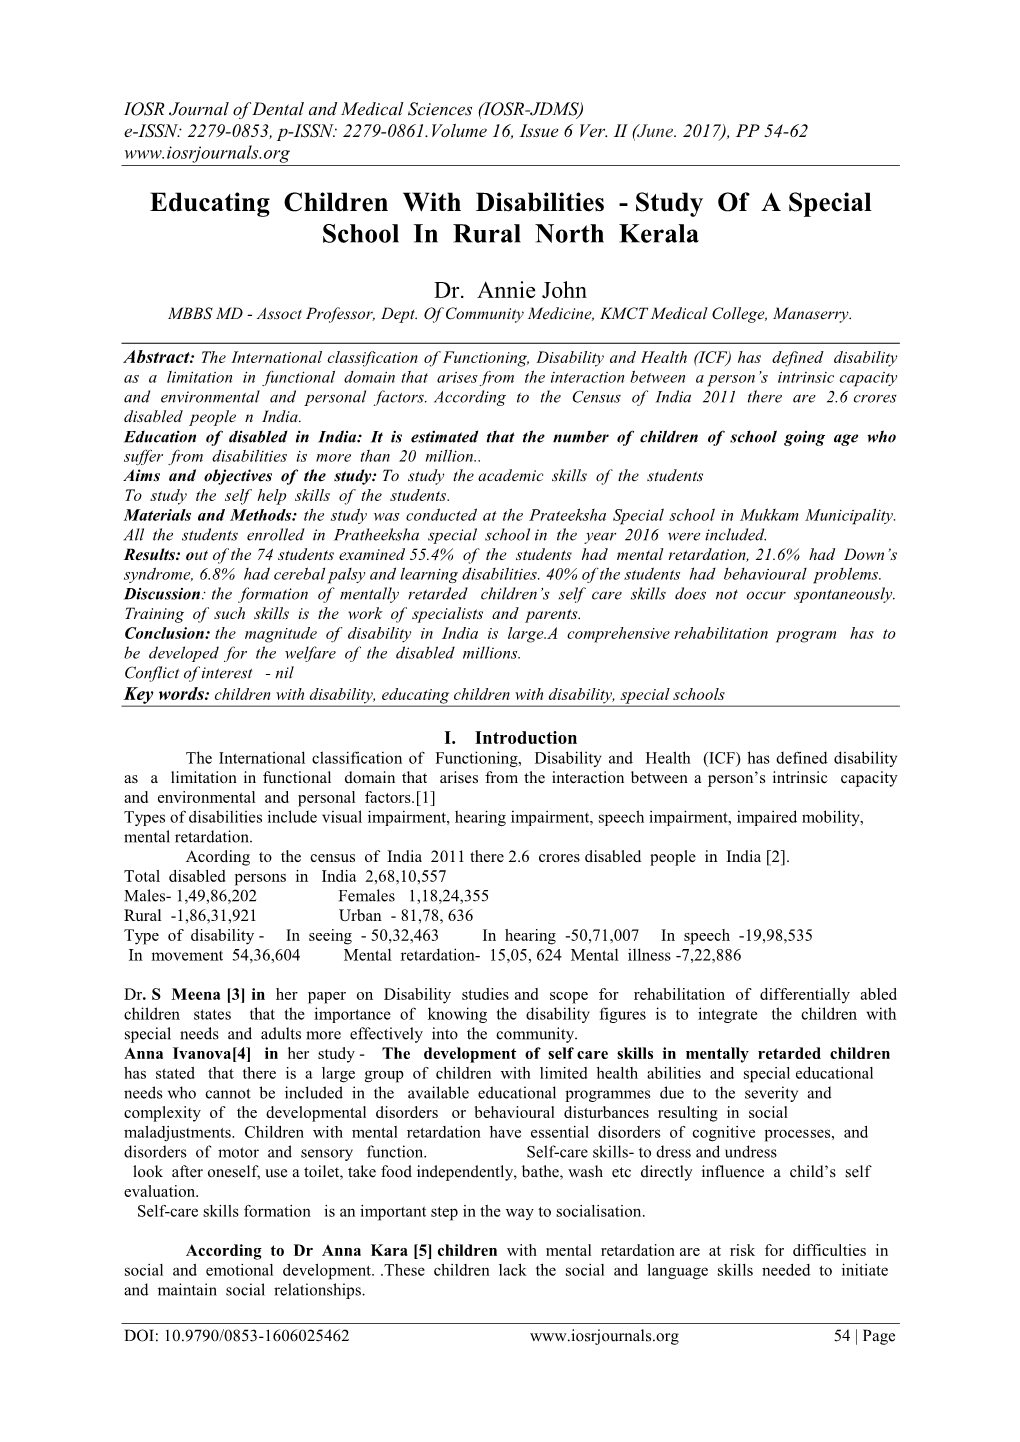 Educating Children with Disabilities - Study of a Special School in Rural North Kerala